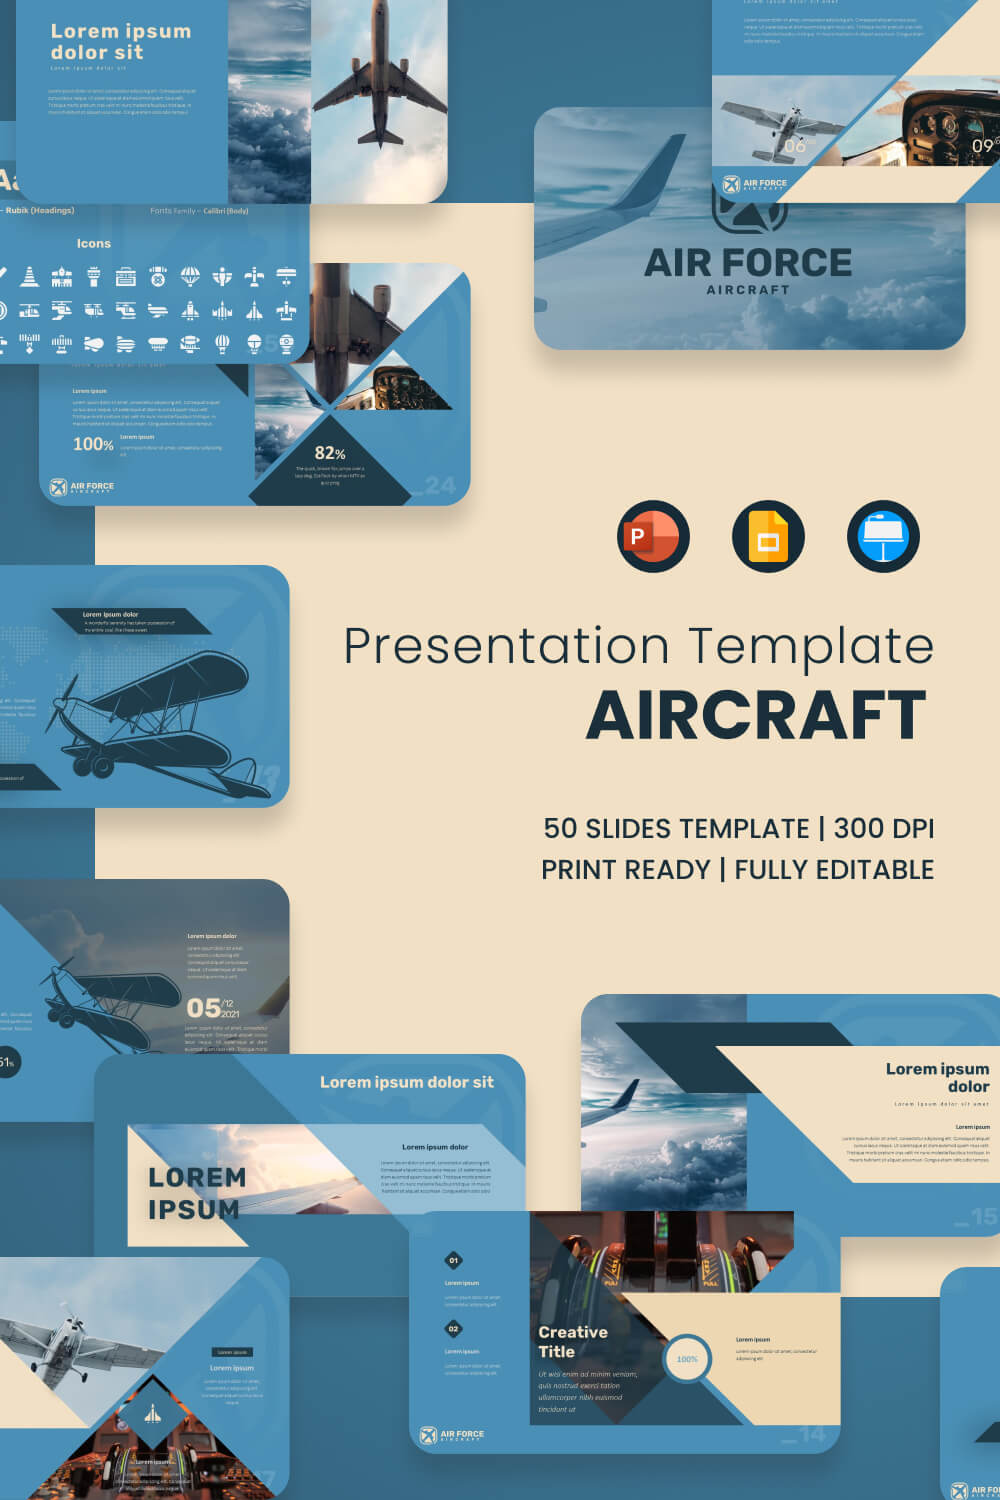 AirForce Military Presentation Template PINTEREST.